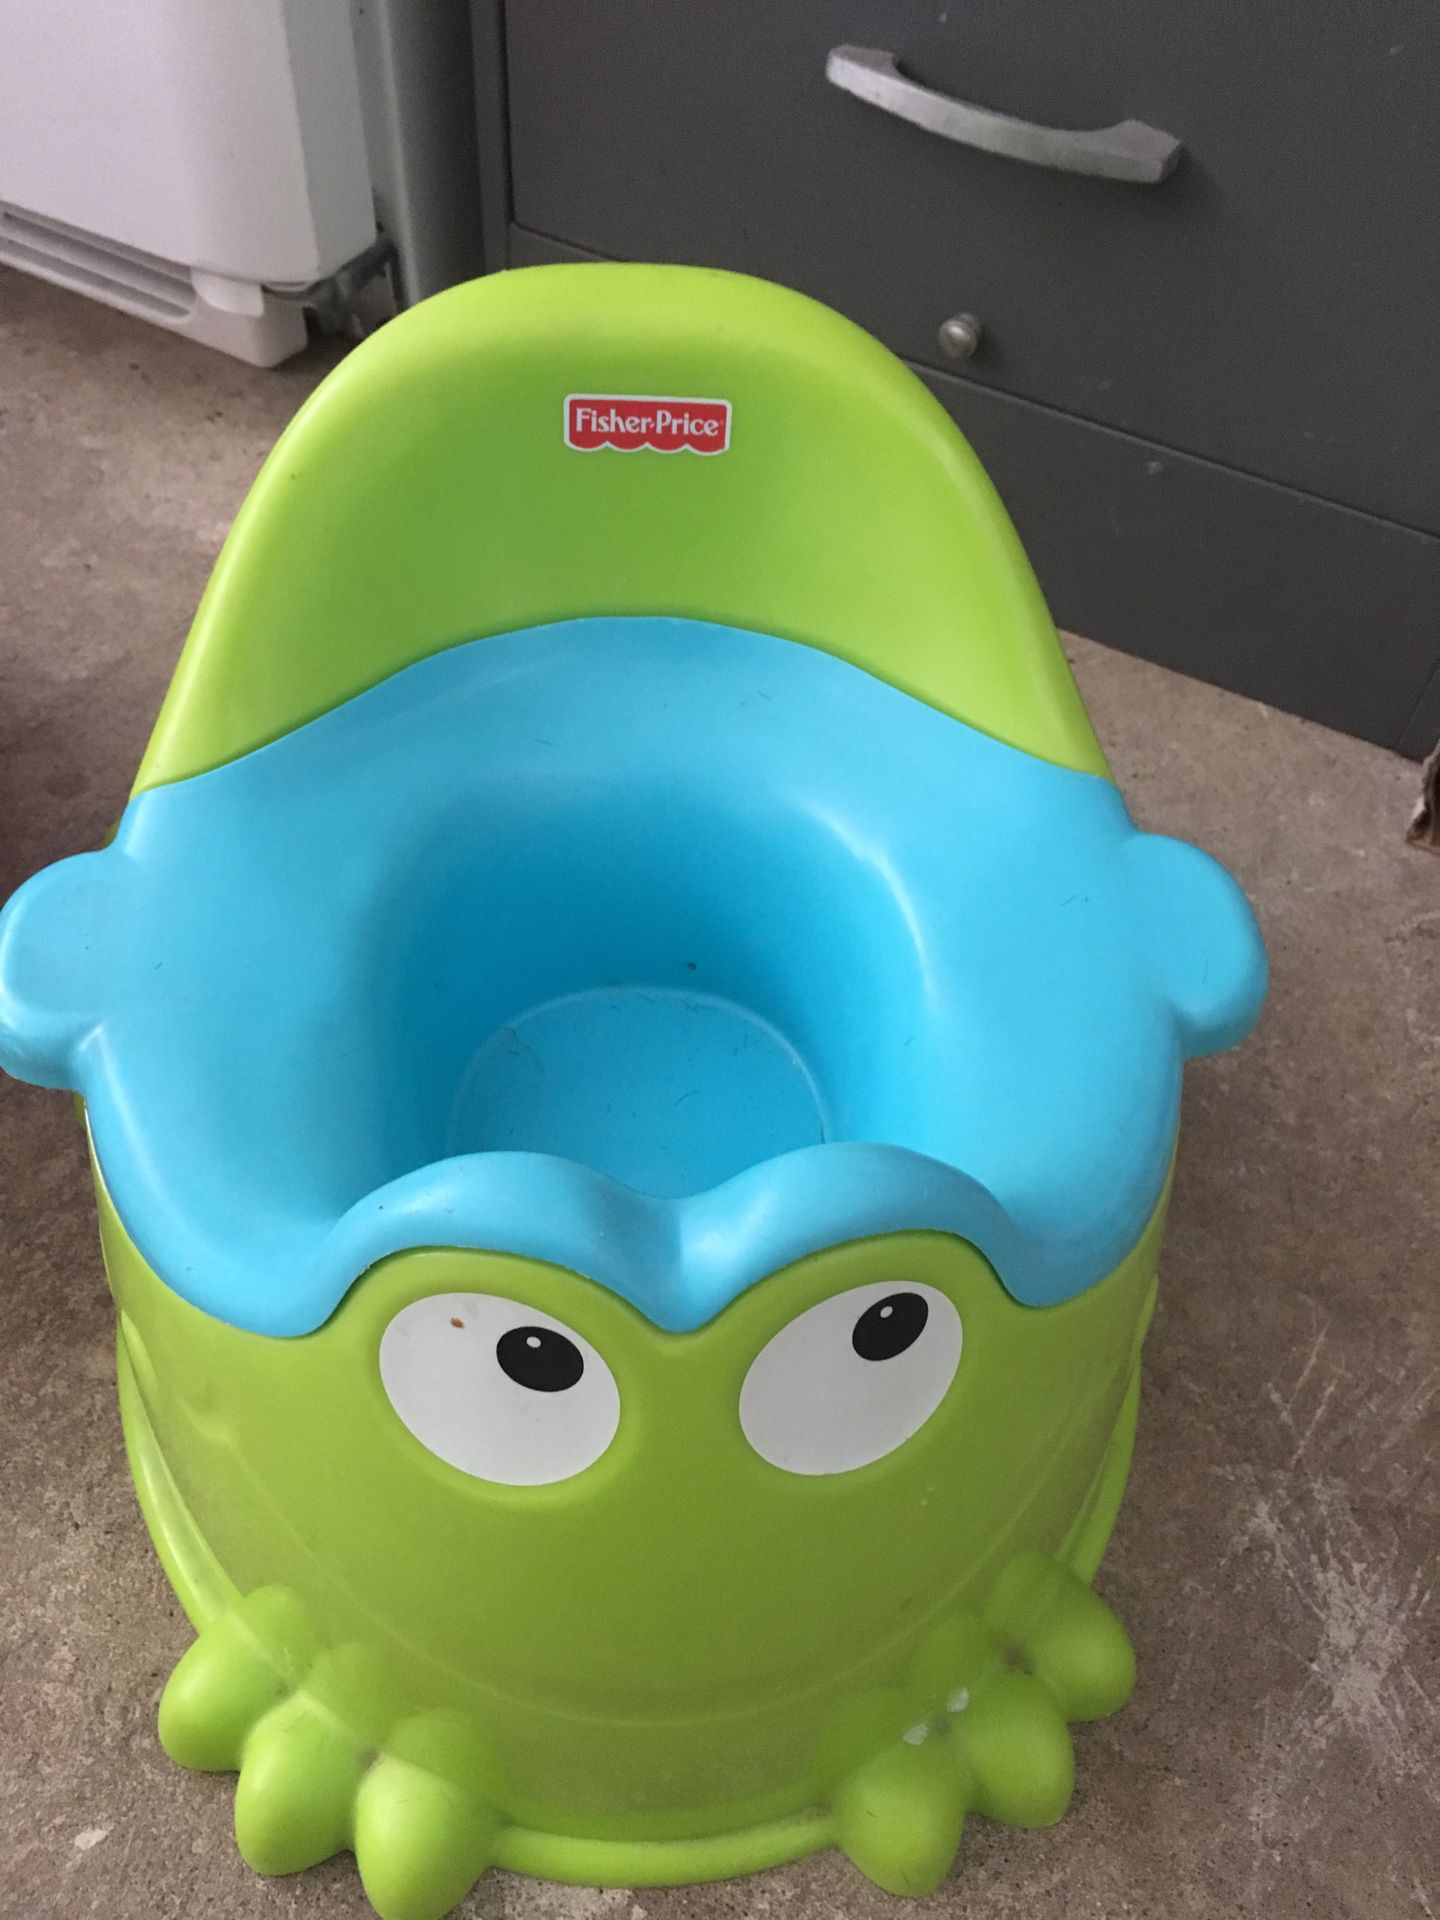 Fisher-price potty chair